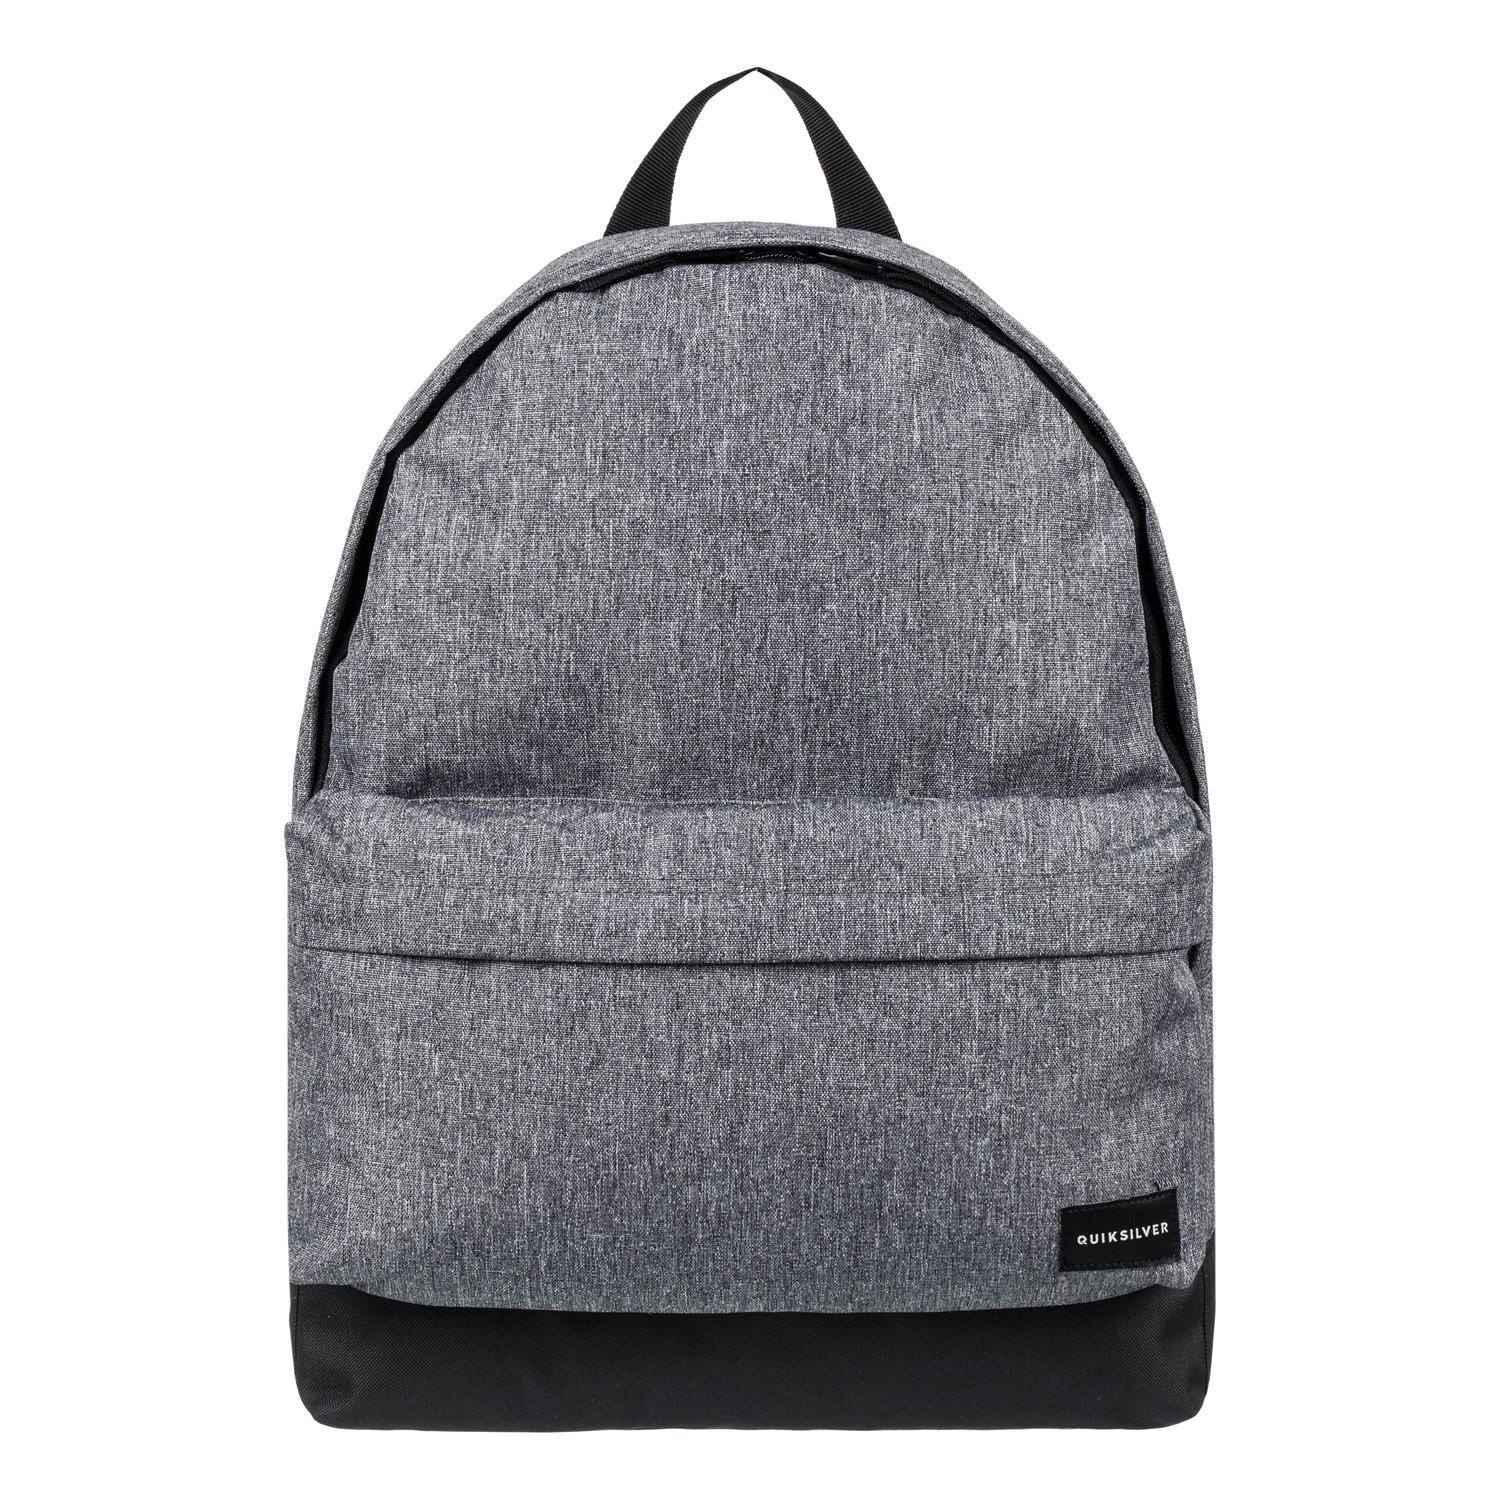 QUIKSILVER NEW Mens Everyday Poster 25L Backpack Light Grey Heather BNWT